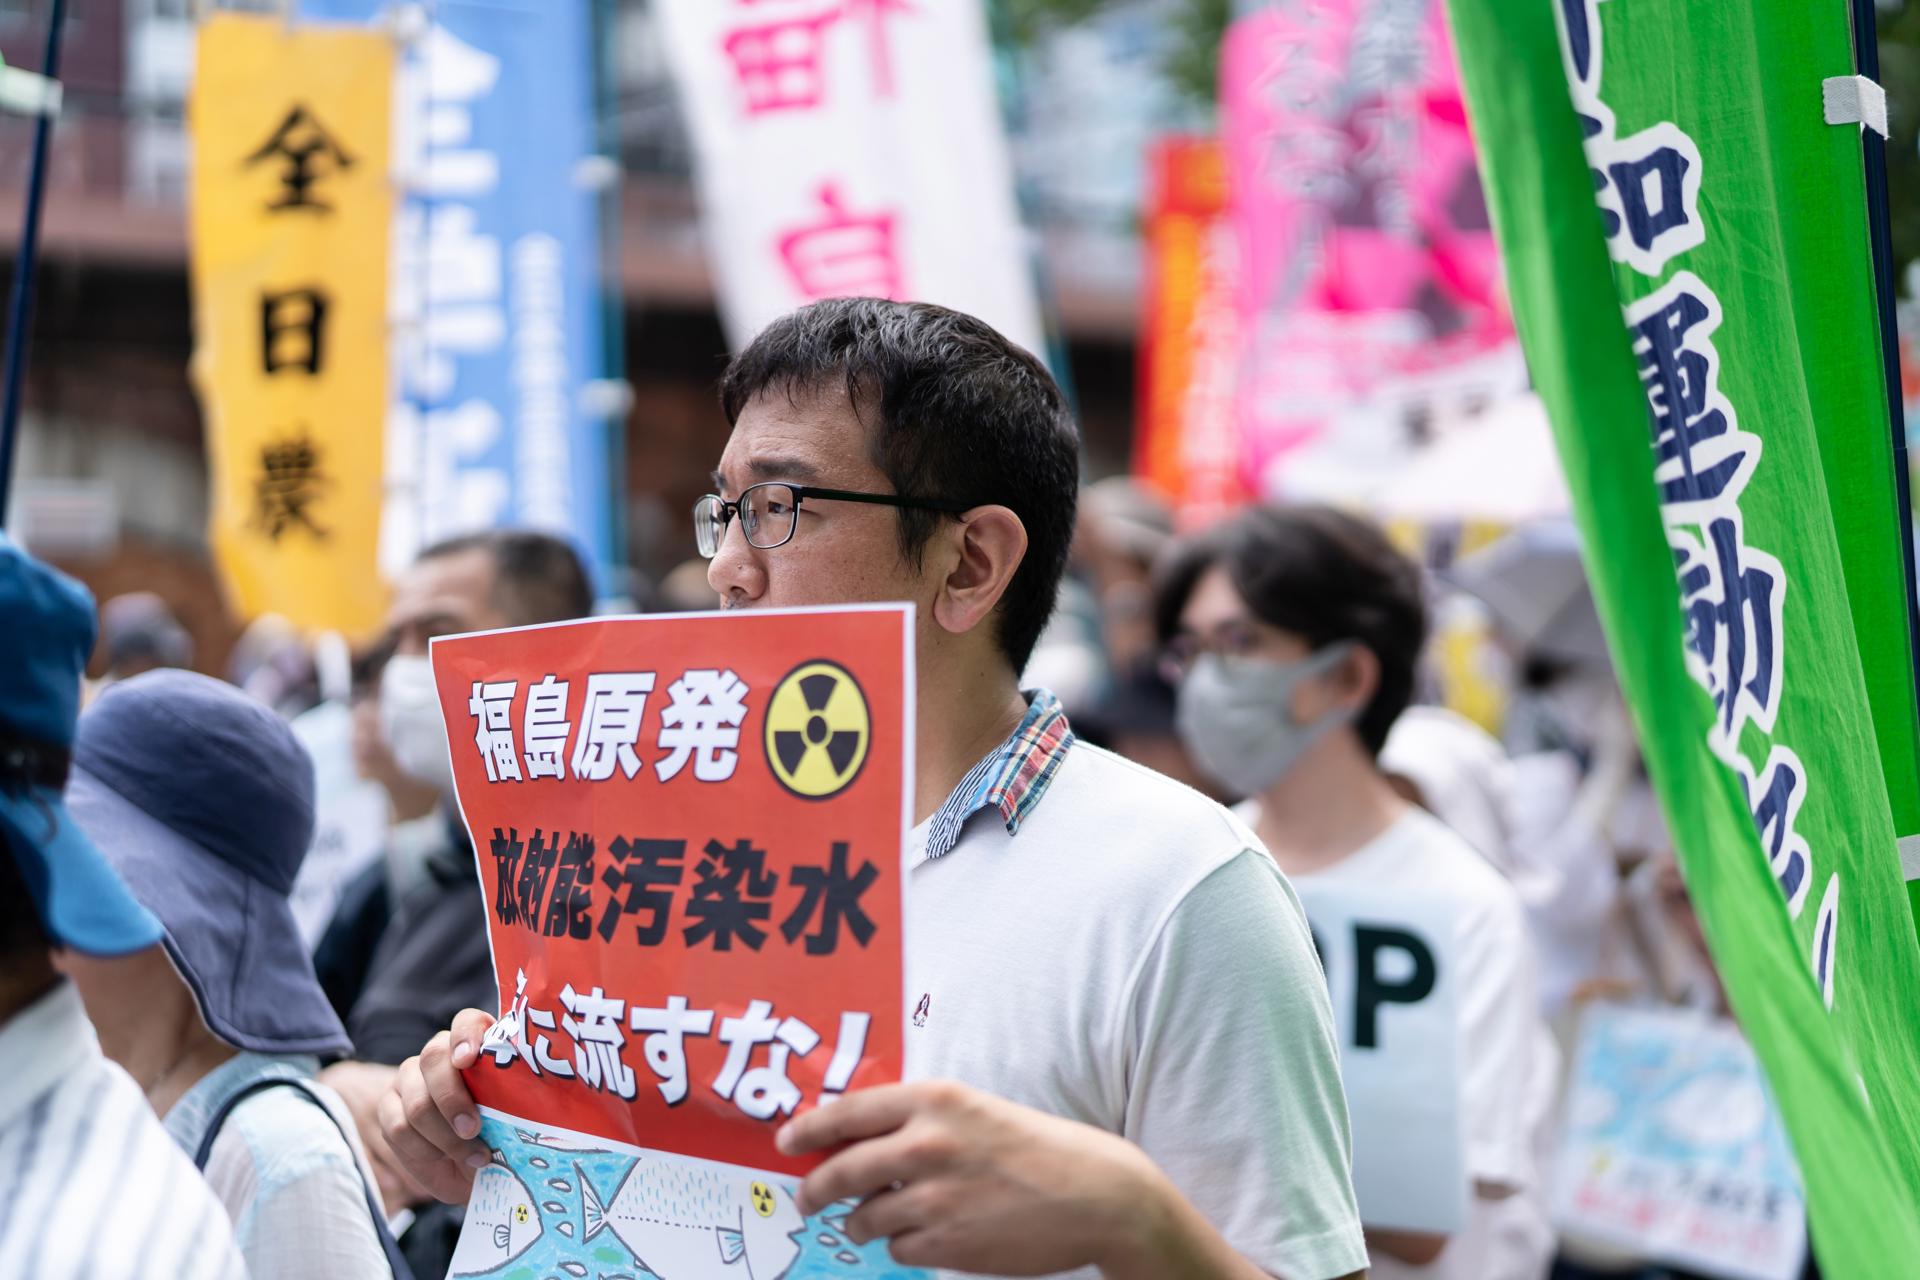 Protesters hold up placards protesting against the release of treated radioactive water from the Tokyo Electric Power Co. (Tepco) Fukushima Dai-ichi Nuclear Power Station during a rally outside the Tepco headquarters in Tokyo, Japan, 24 August 2023. EFE-EPA/TOMOHIRO OHSUMI